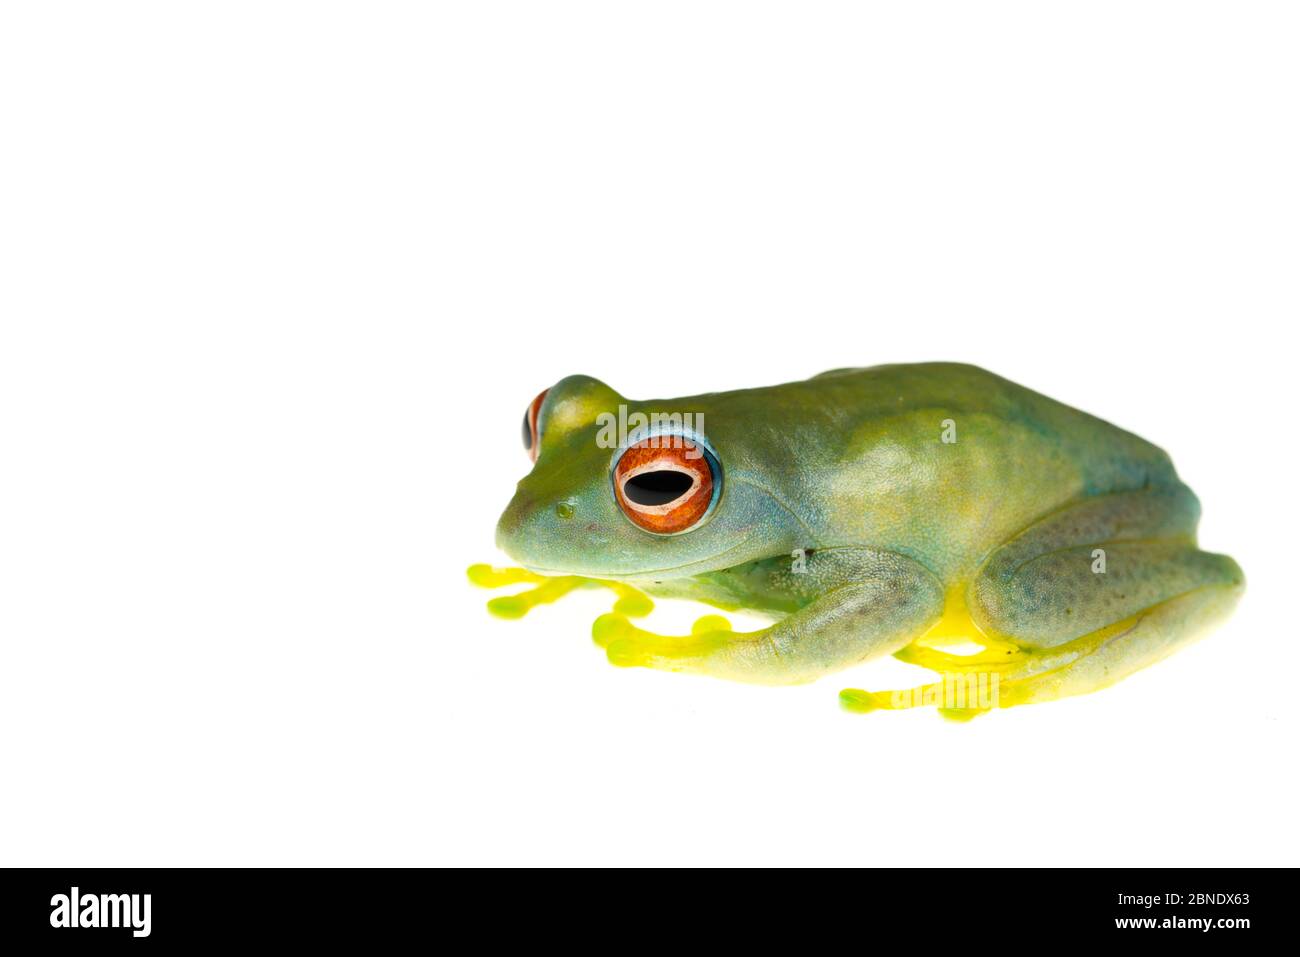 Red-eyed boophis frog (Boophis luteus) captive occurs in Madagascar. Stock Photo